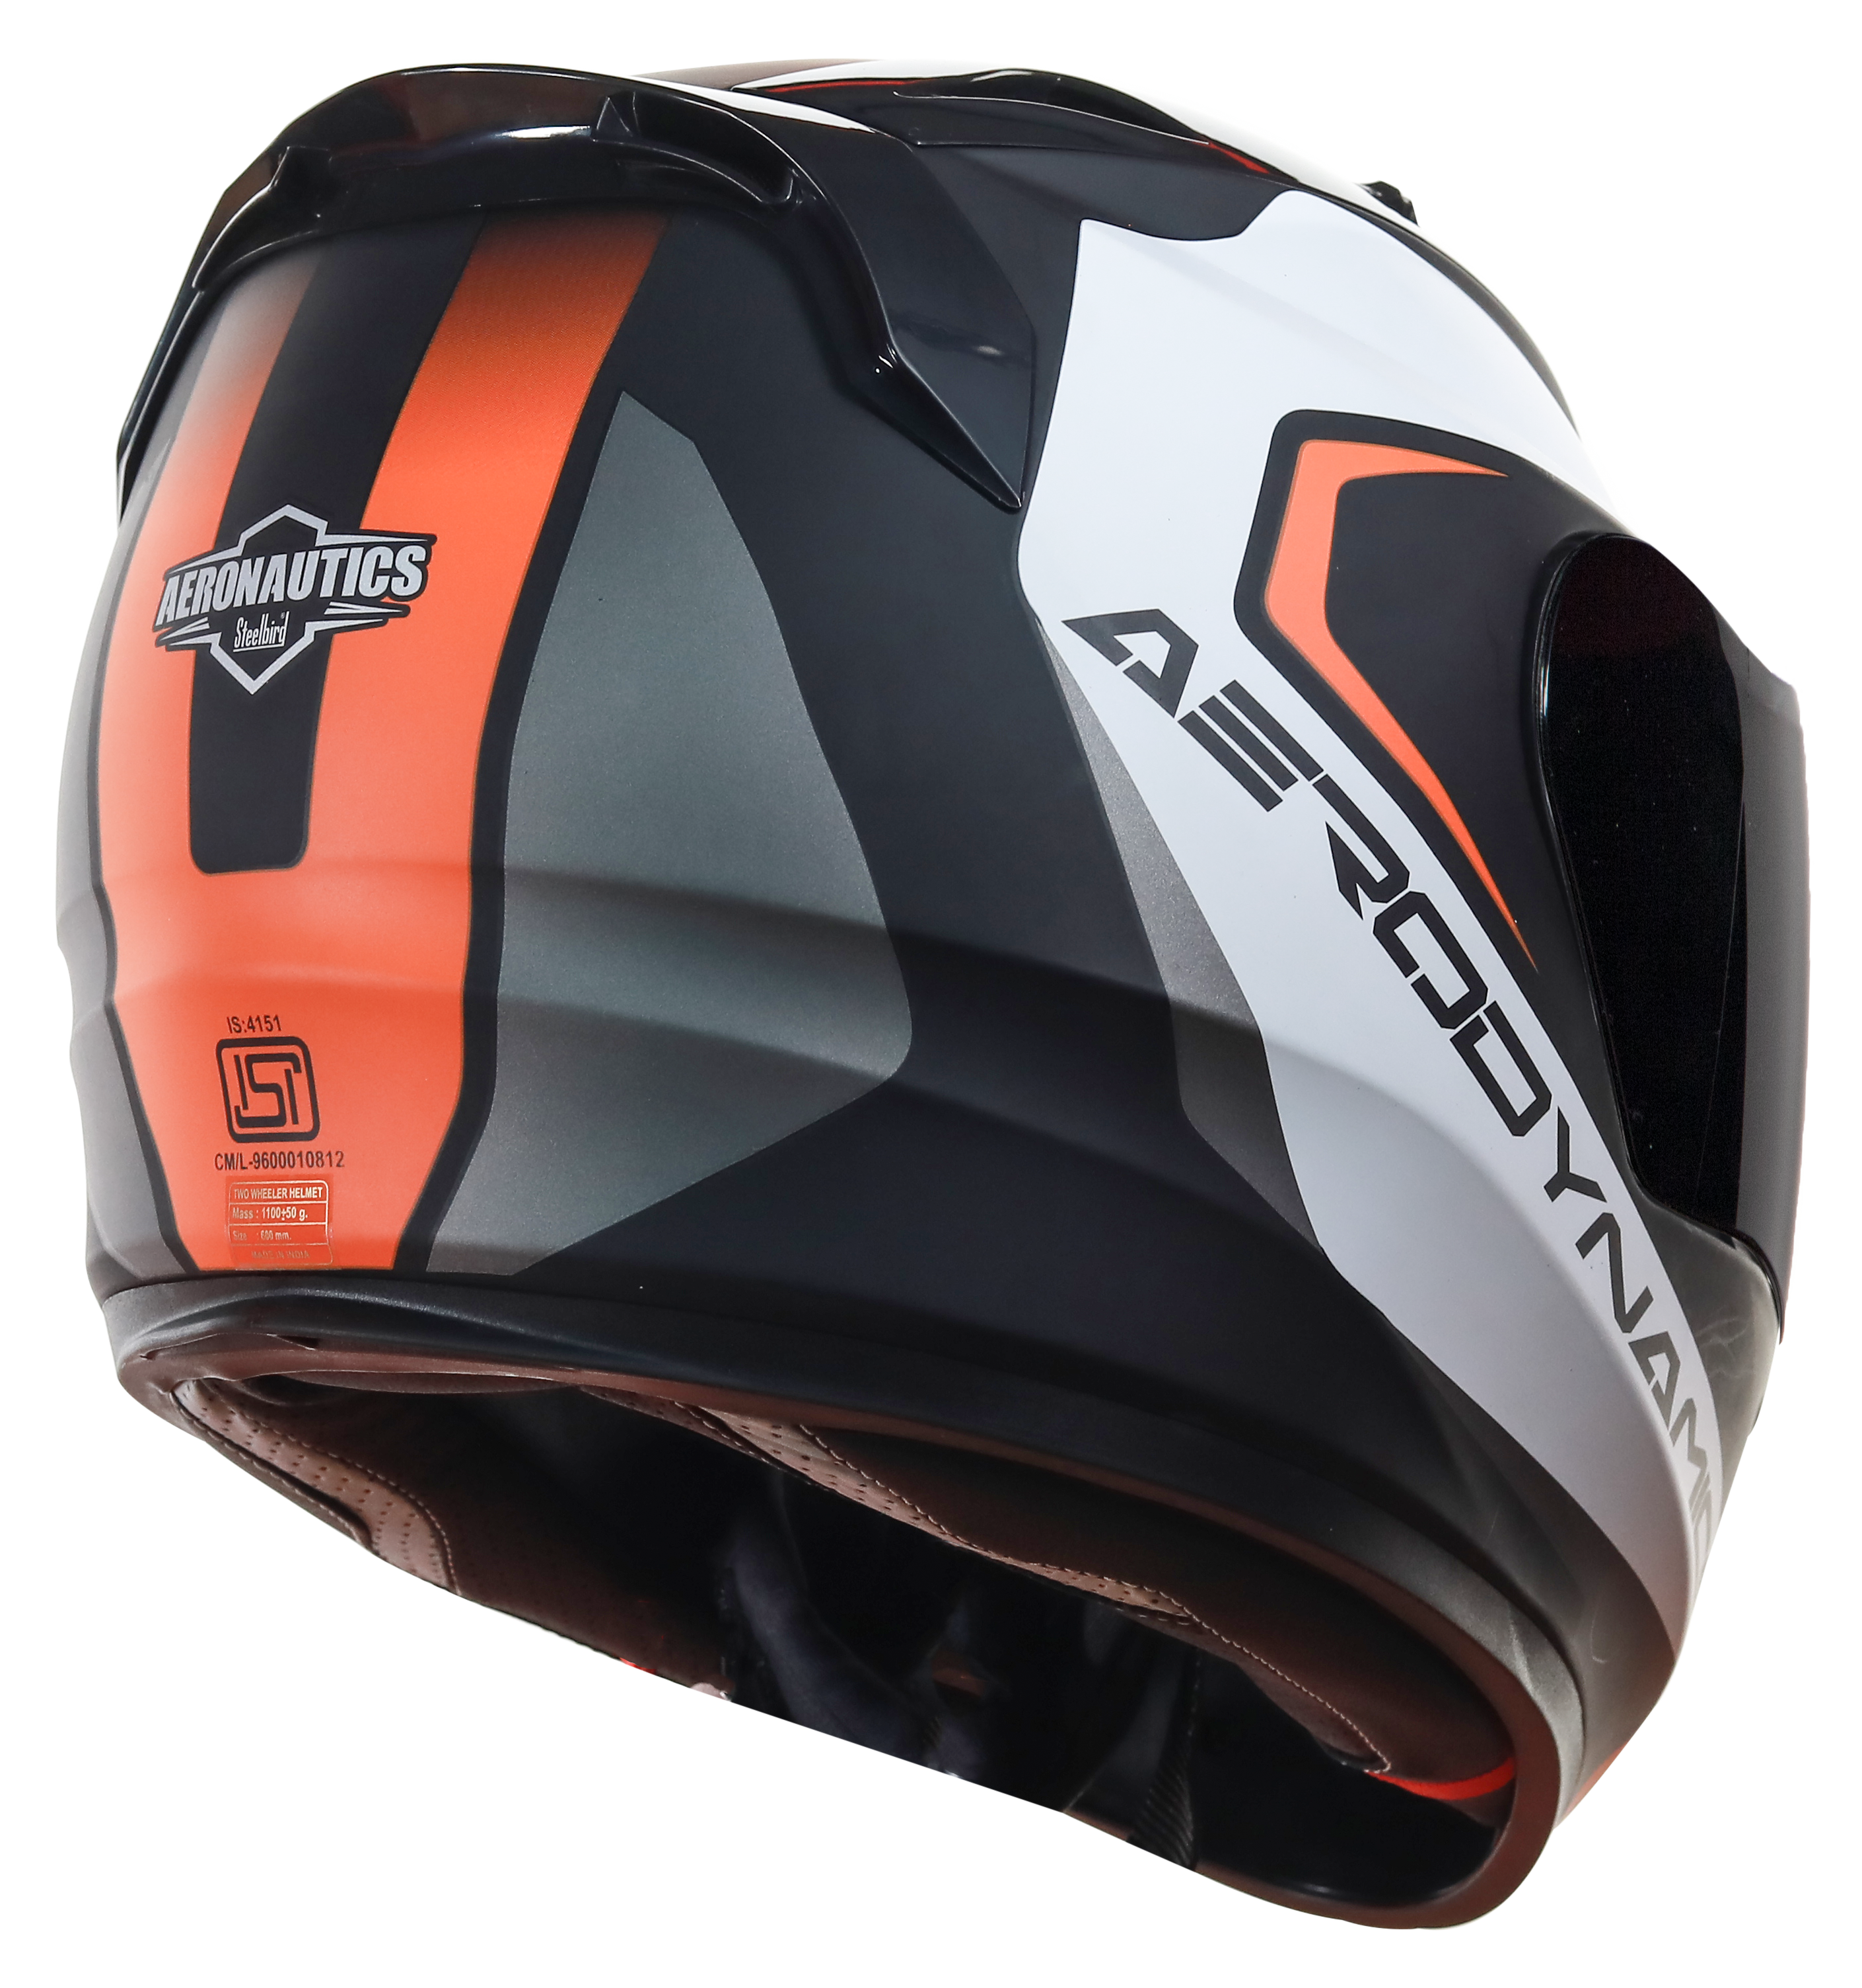 SA-1 Aerodynamics Mat Black With Orange(Fitted With Clear Visor Extra Gold Chrome Visor Free)